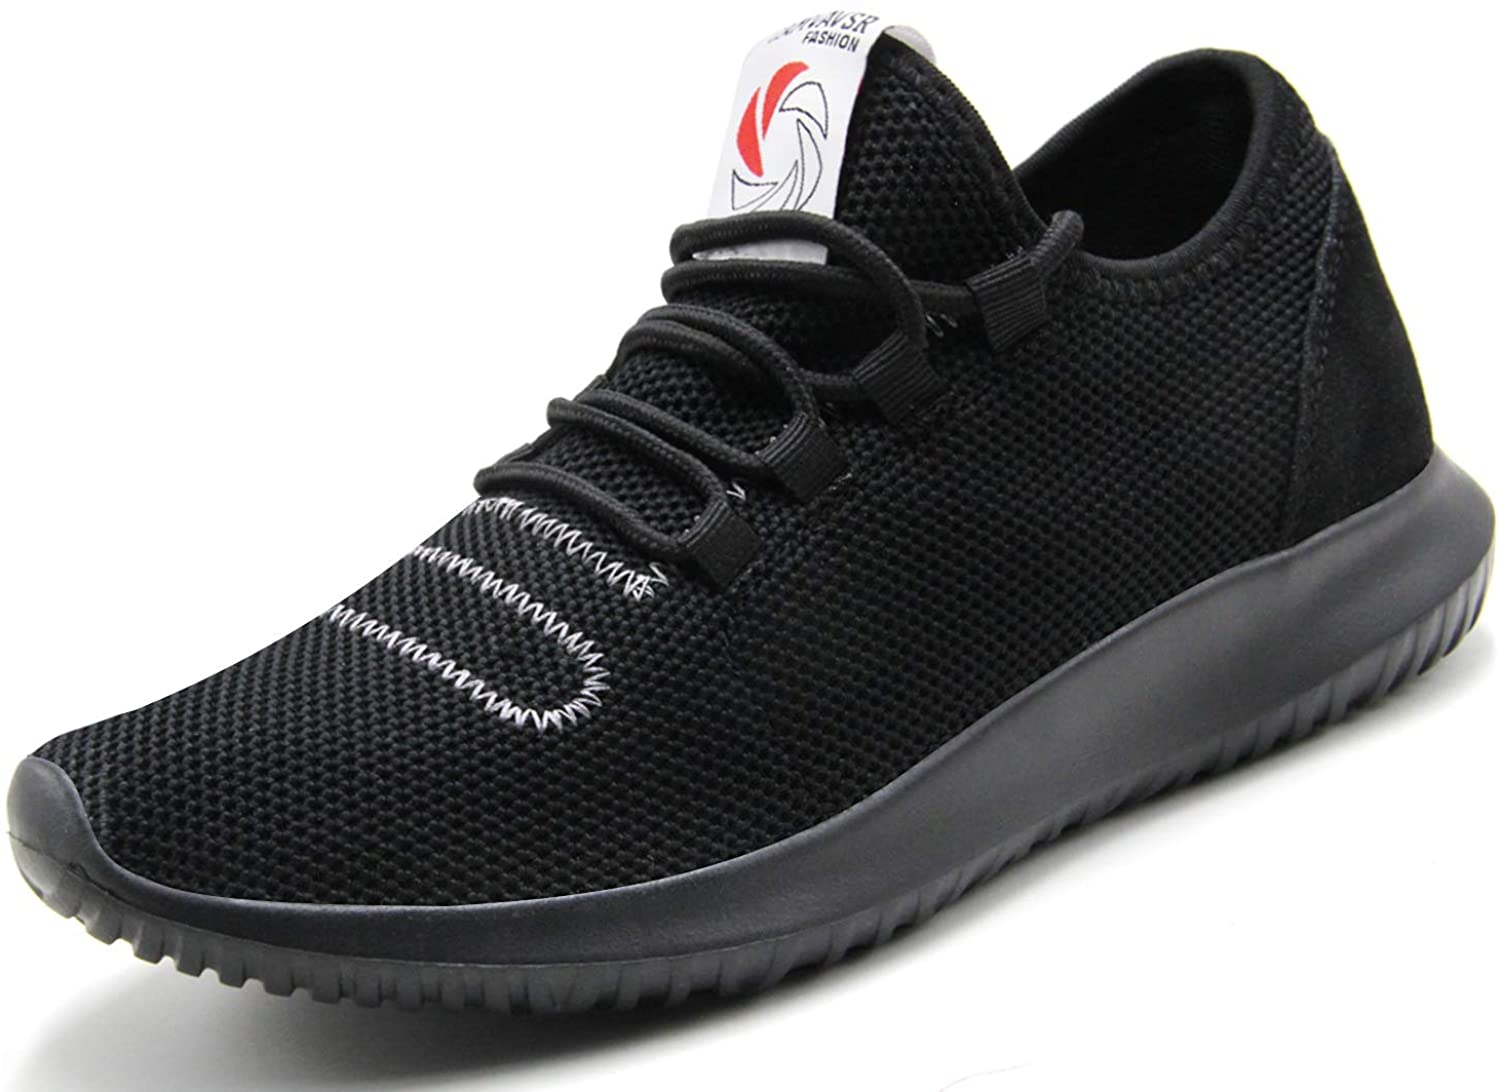 CAMVAVSR Mens Sneakers Fashion Lightweight Running Shoes Slip-On Casual Shoes for Walking